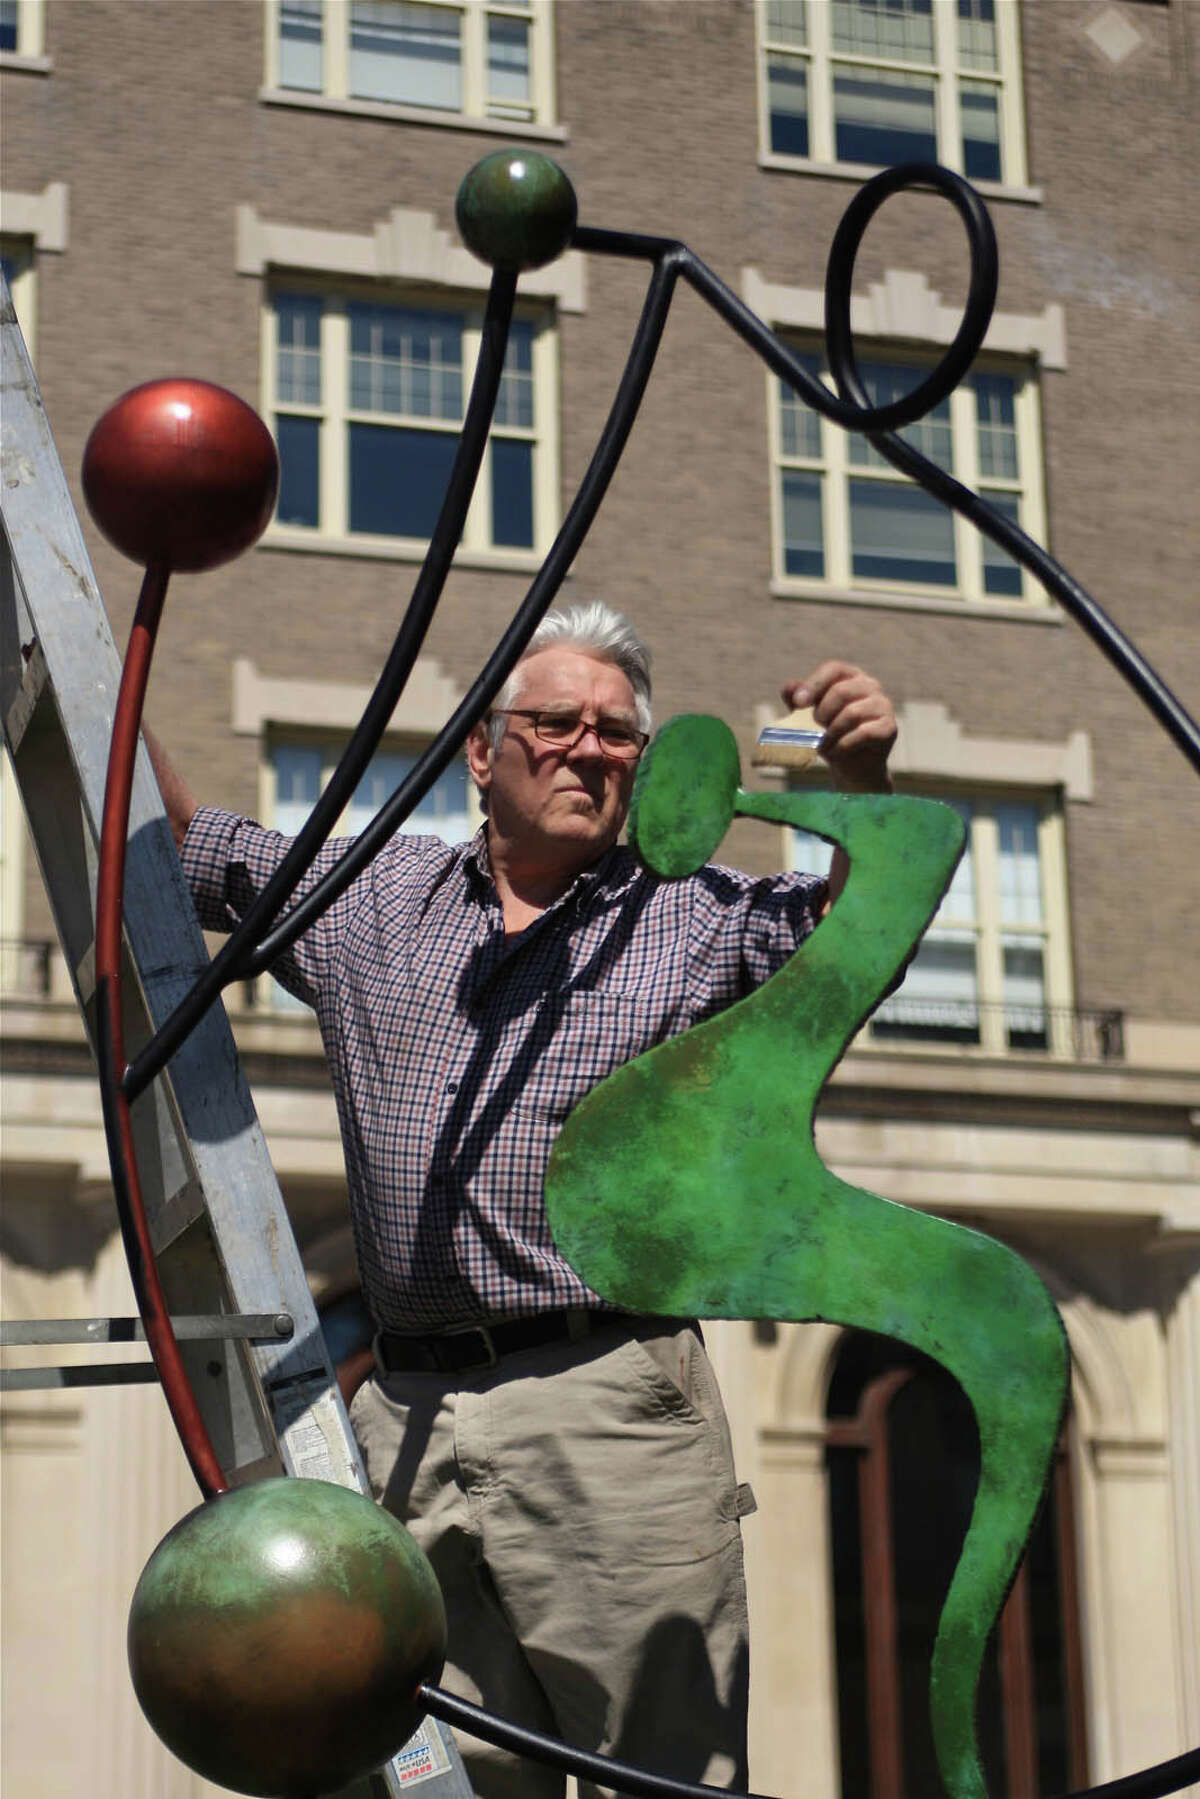 Sculptor Charlie Hewitt installs a sculpture on Greenwich Avenue in Greenwich last month. It is one of several new steel sculptures installed by the nationally known artist in conjunction with the Greenwich Arts Council's annual Art to the Avenue celebration that runs for most of the month of May. Beginning May 3, 2012, the program will transform Greenwich Avenue, and some nearby streets, into one large art gallery. Visitors to the area will be encouraged to wander into retail spots and check out art from 150 artists. The program, which kicks off with an opening night from 5:30 to 8 p.m., runs through May 28. Contributed photo/J.D. Durrans.